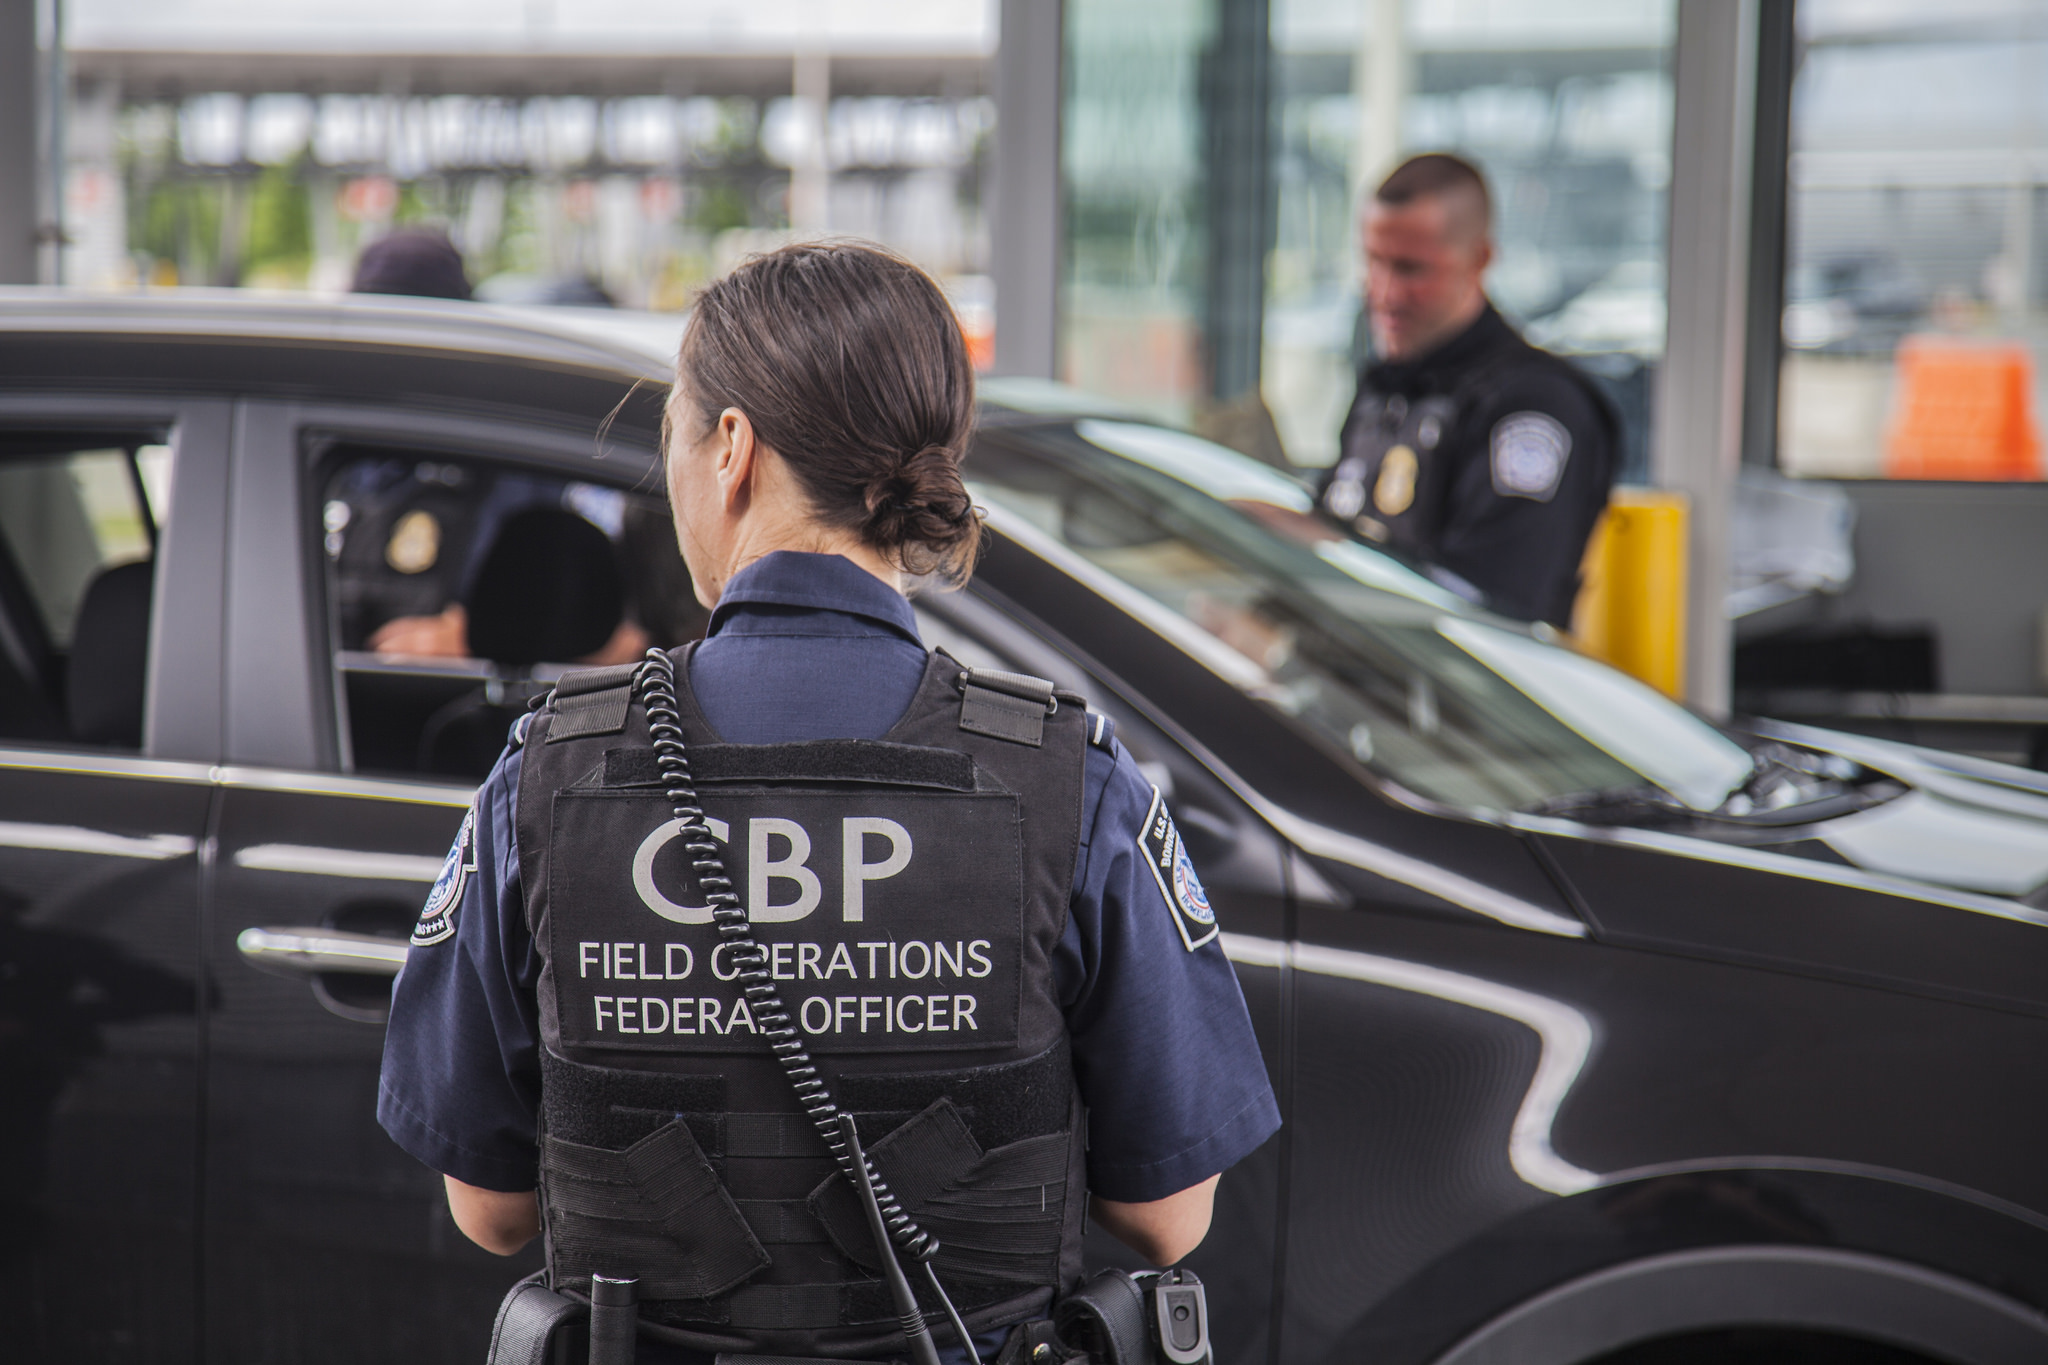 Custom and Border Protection Use–of-Force Data Raises More Questions